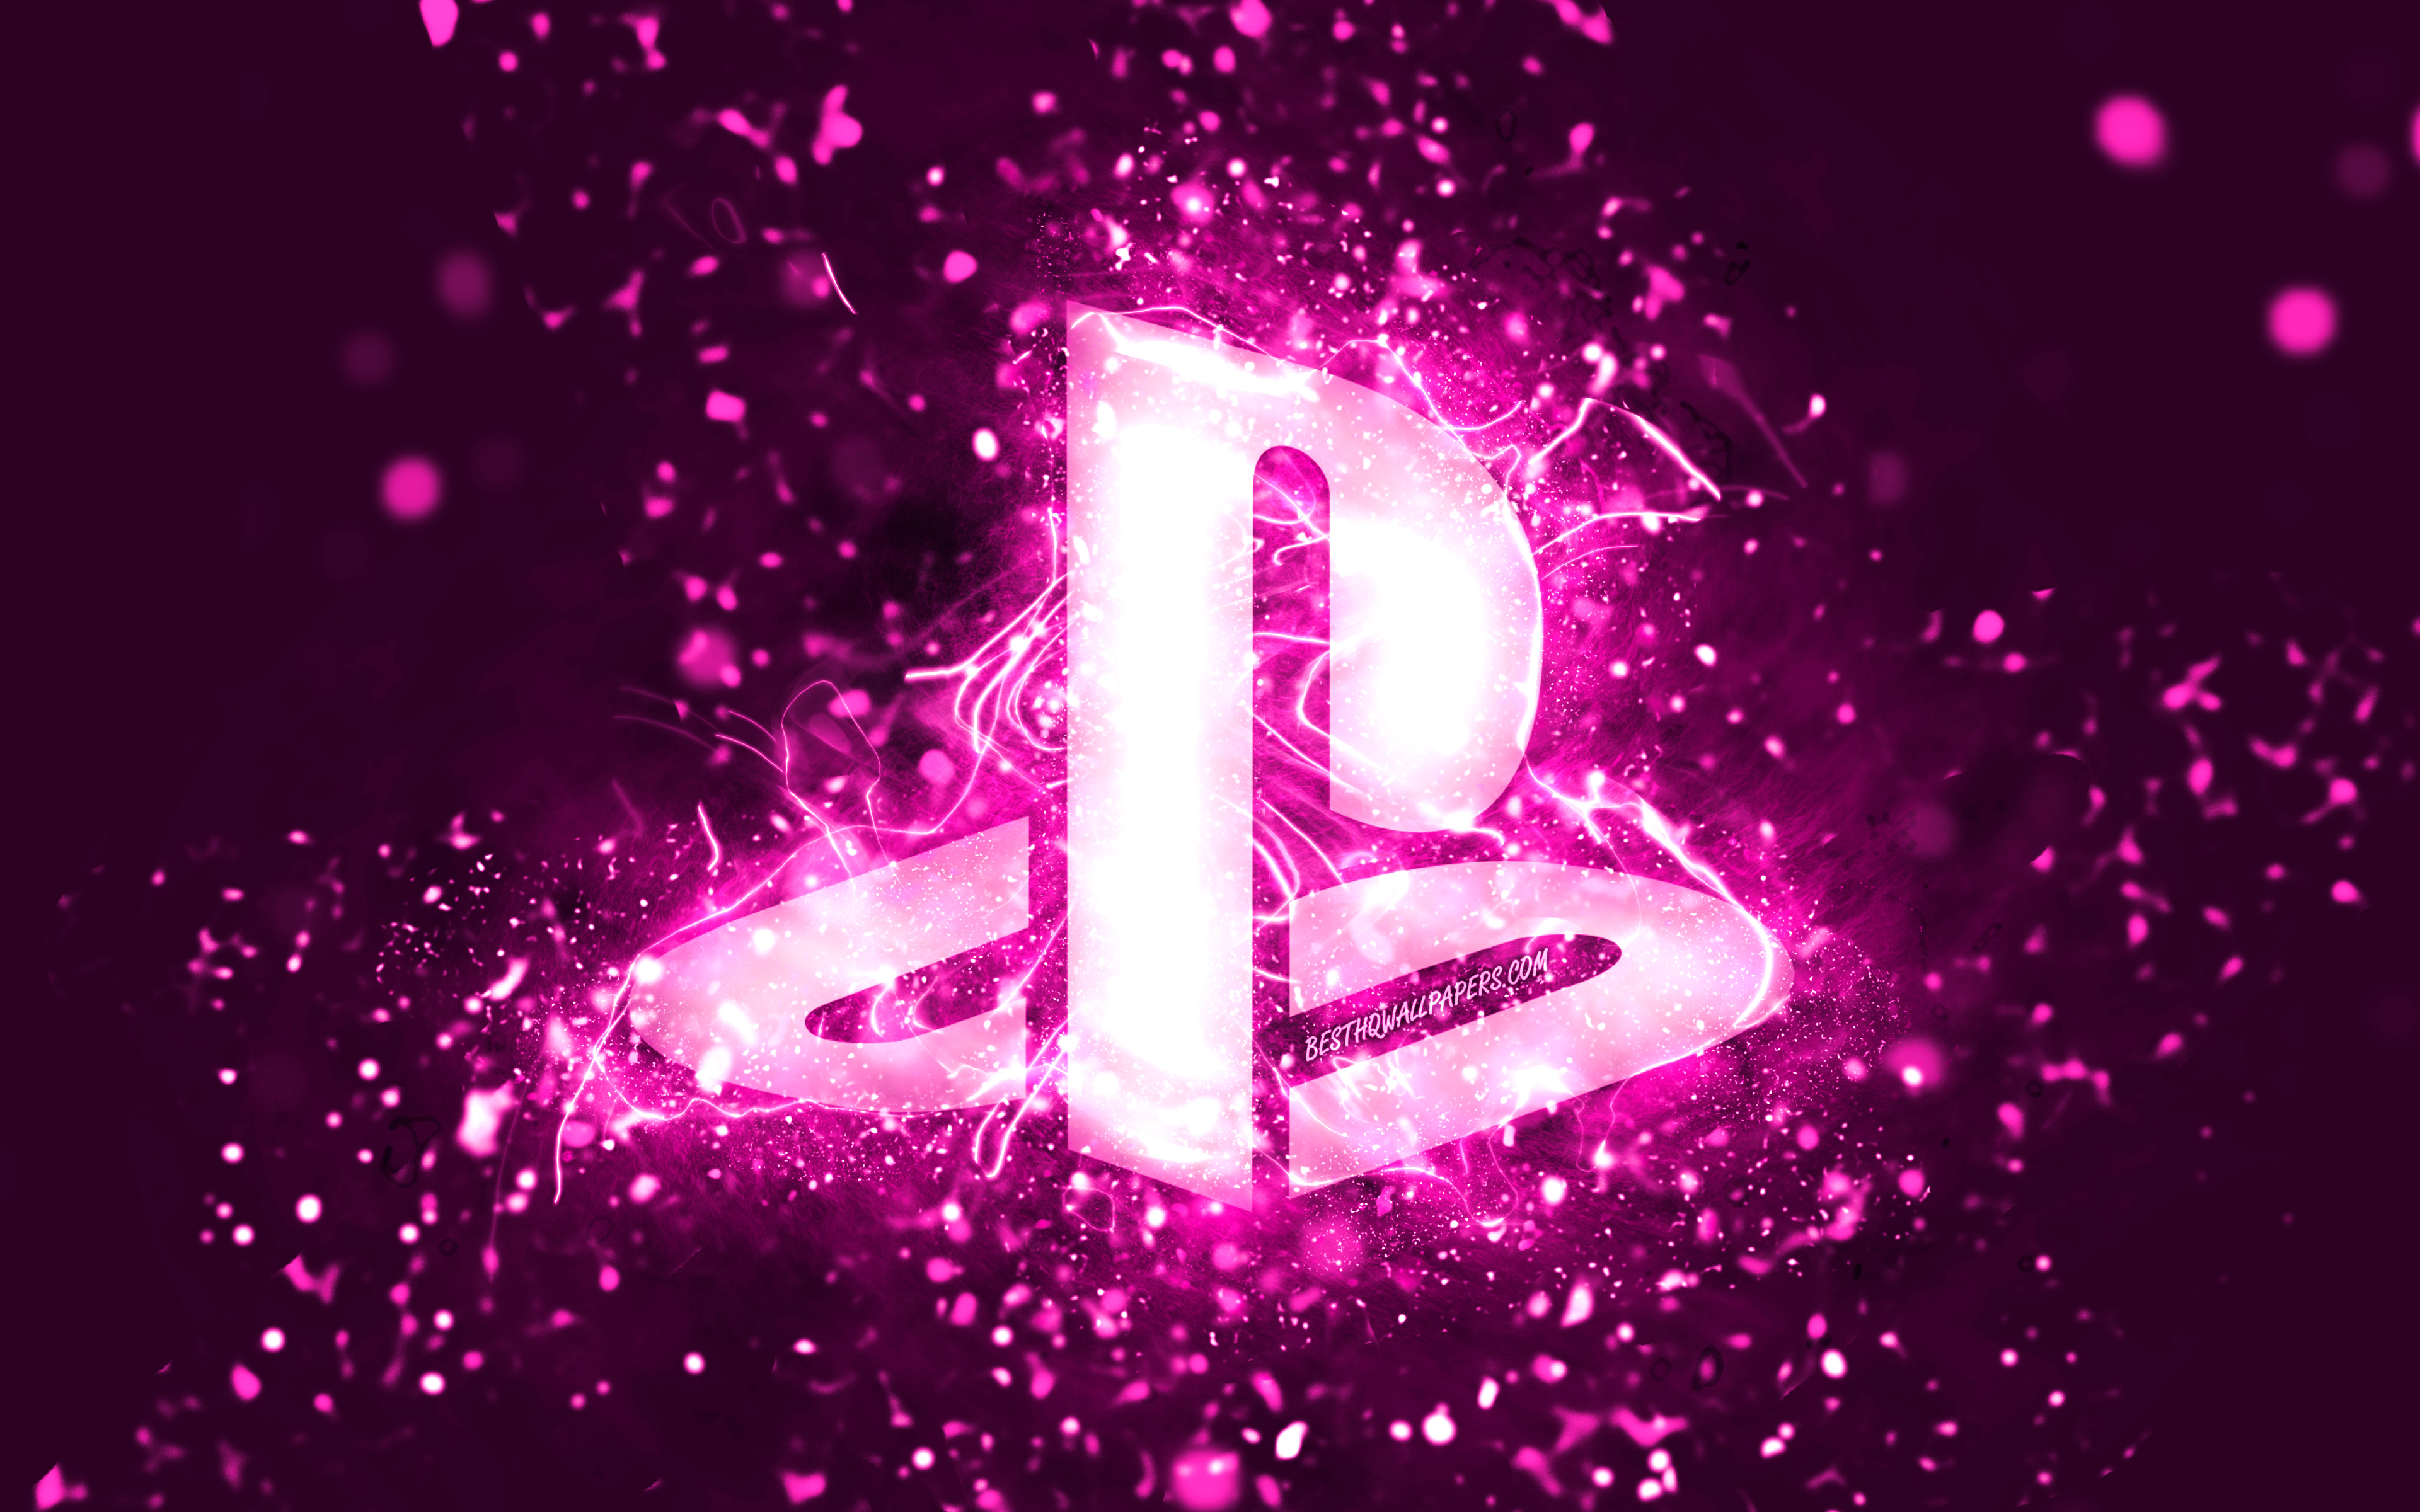 Download wallpaper PlayStation purple logo, 4k, purple neon lights, creative, purple abstract background, PlayStation logo, PlayStation for desktop with resolution 3840x2400. High Quality HD picture wallpaper